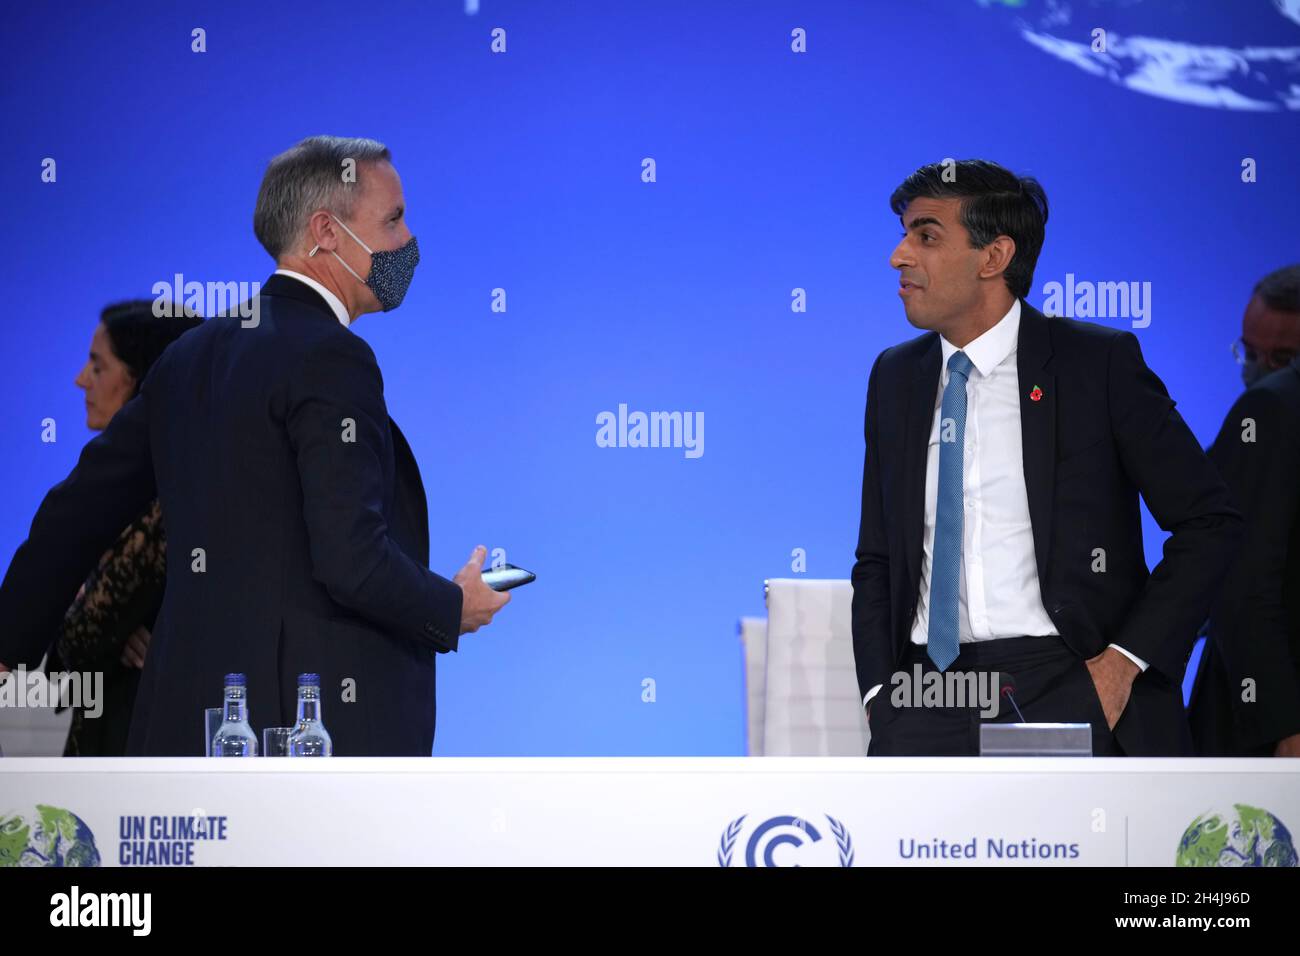 Chancellor Rishi Sunak (right) and Mark Carney, Prime Minister Boris Johnson's Finance Adviser for COP26, ahead of an event on transforming the global financial sector to deliver climate goals, during the Cop26 summit at the Scottish Event Campus (SEC) in Glasgow. Picture date: Wednesday November 3, 2021. Stock Photo